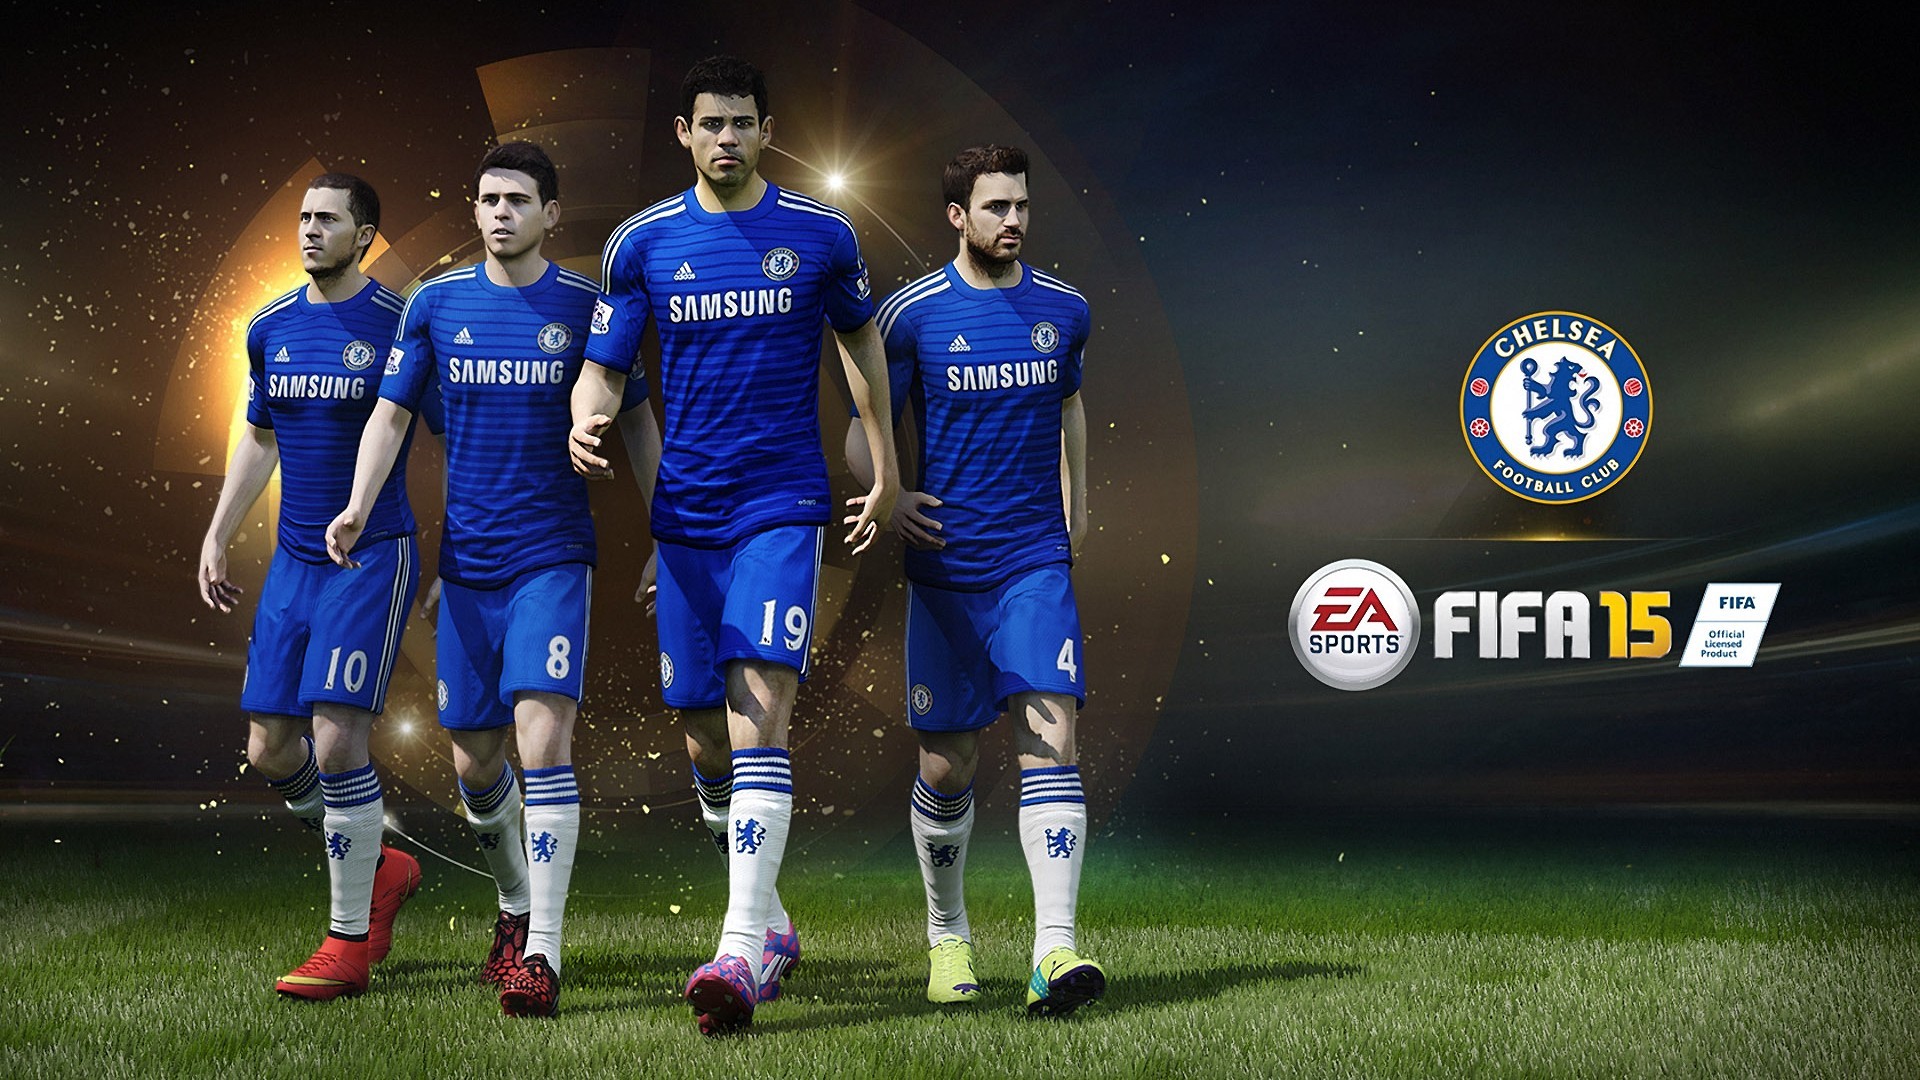 1920x1080 on October 21, 2015 By Stephen Comments Off on Fifa 15 Wallpapers .